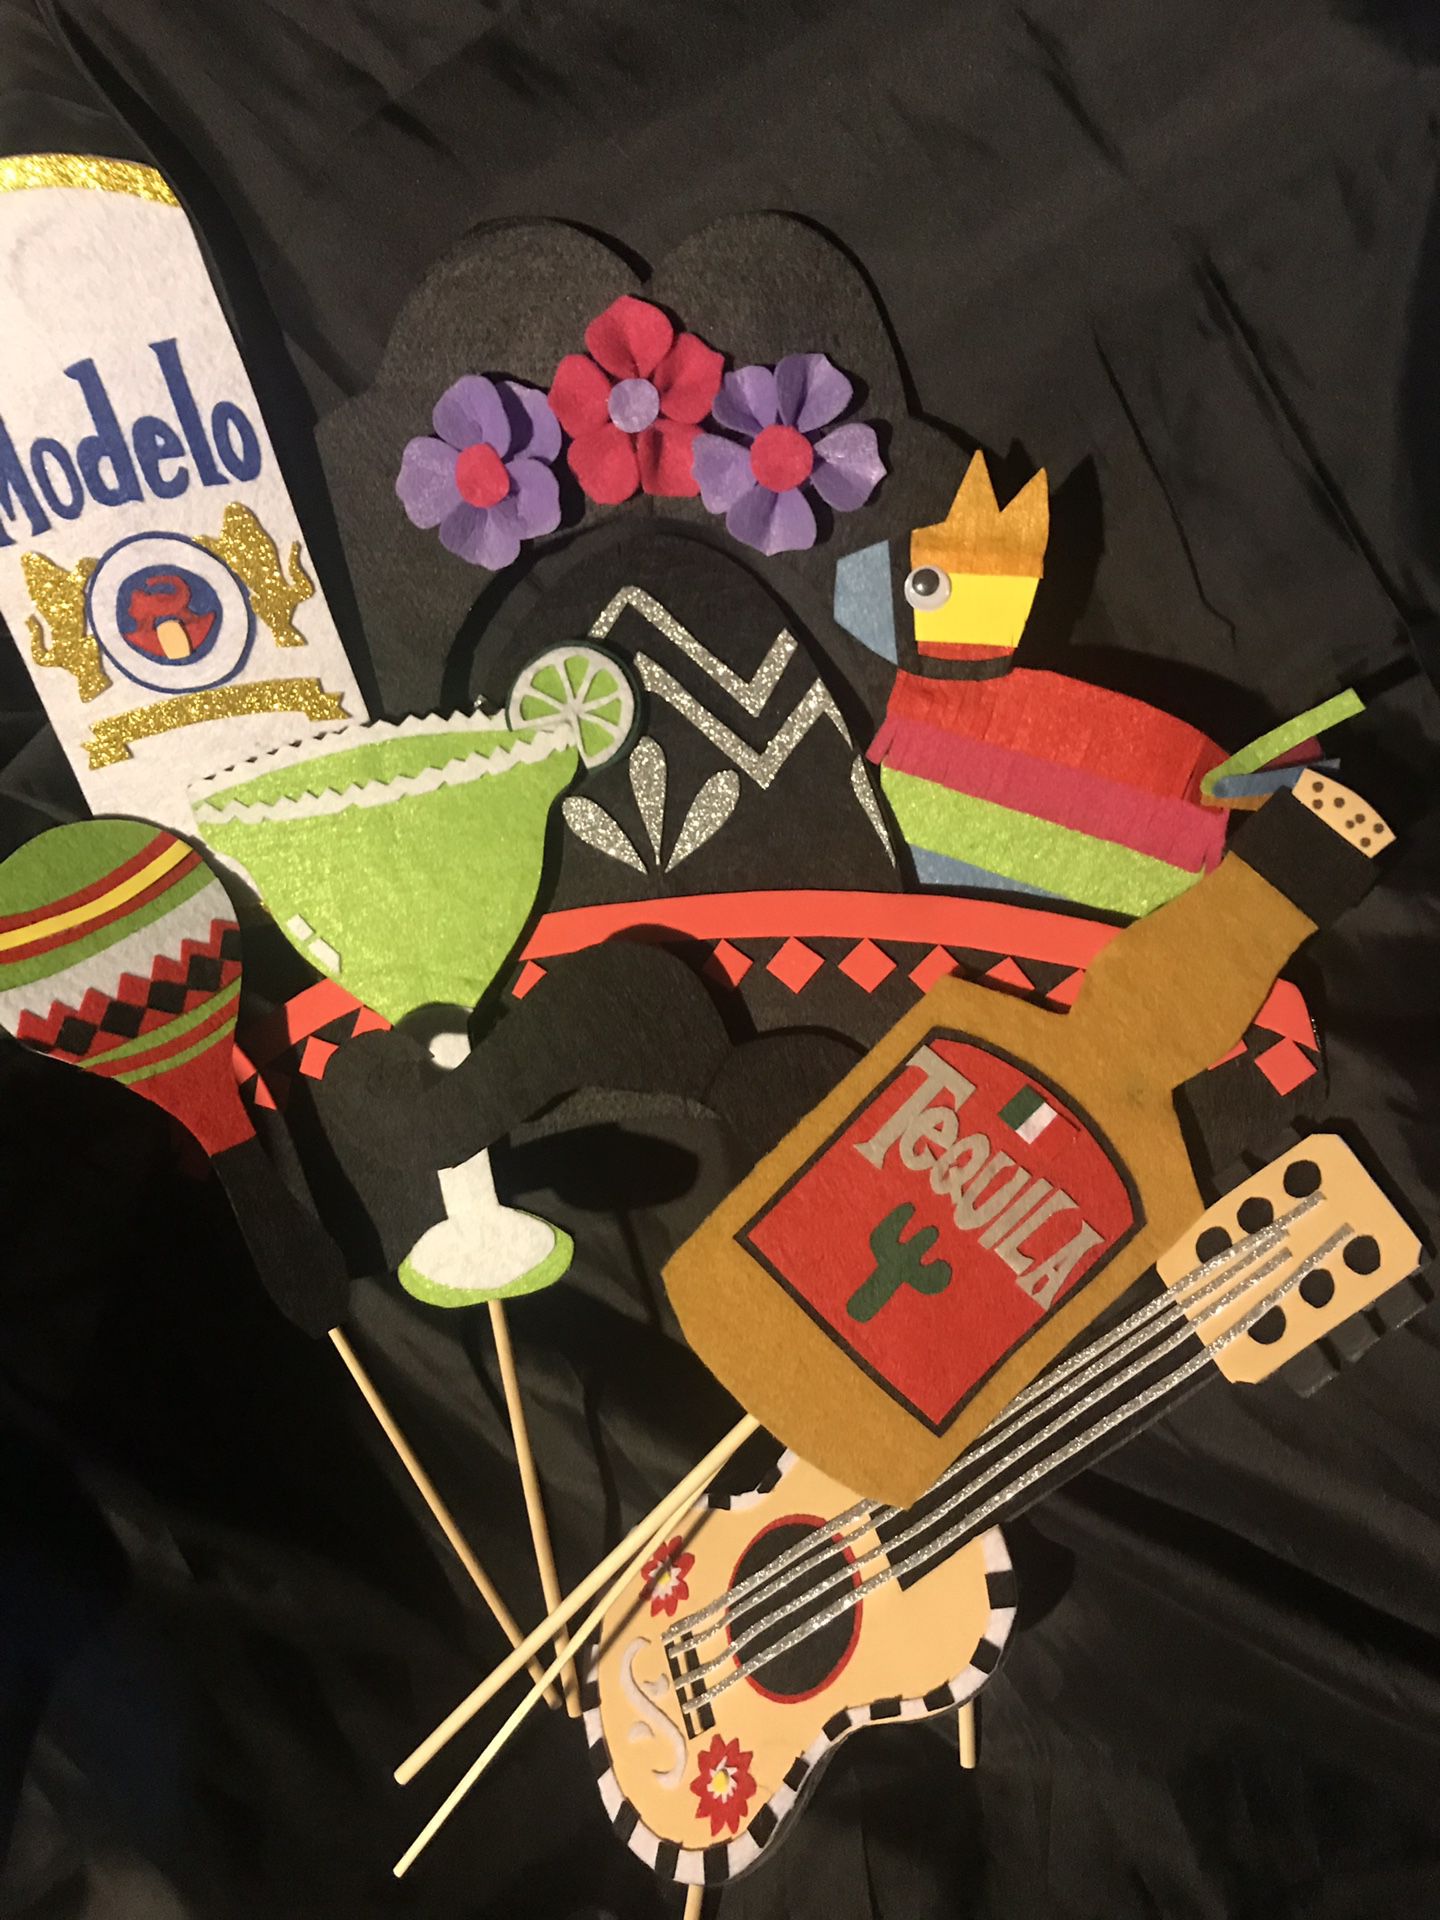 Fiesta photo props for sale. Set is going for $40